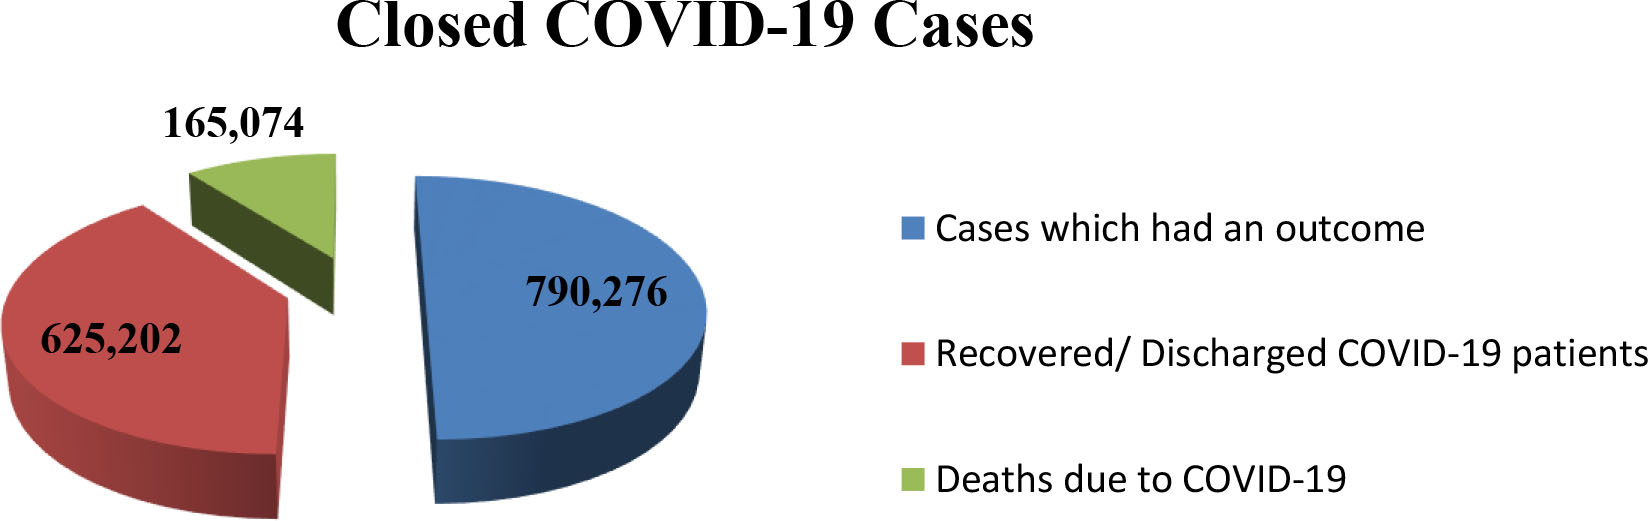 Total number of closed cases of COVID-19 from December, 2019 up to 20 April, 2020.